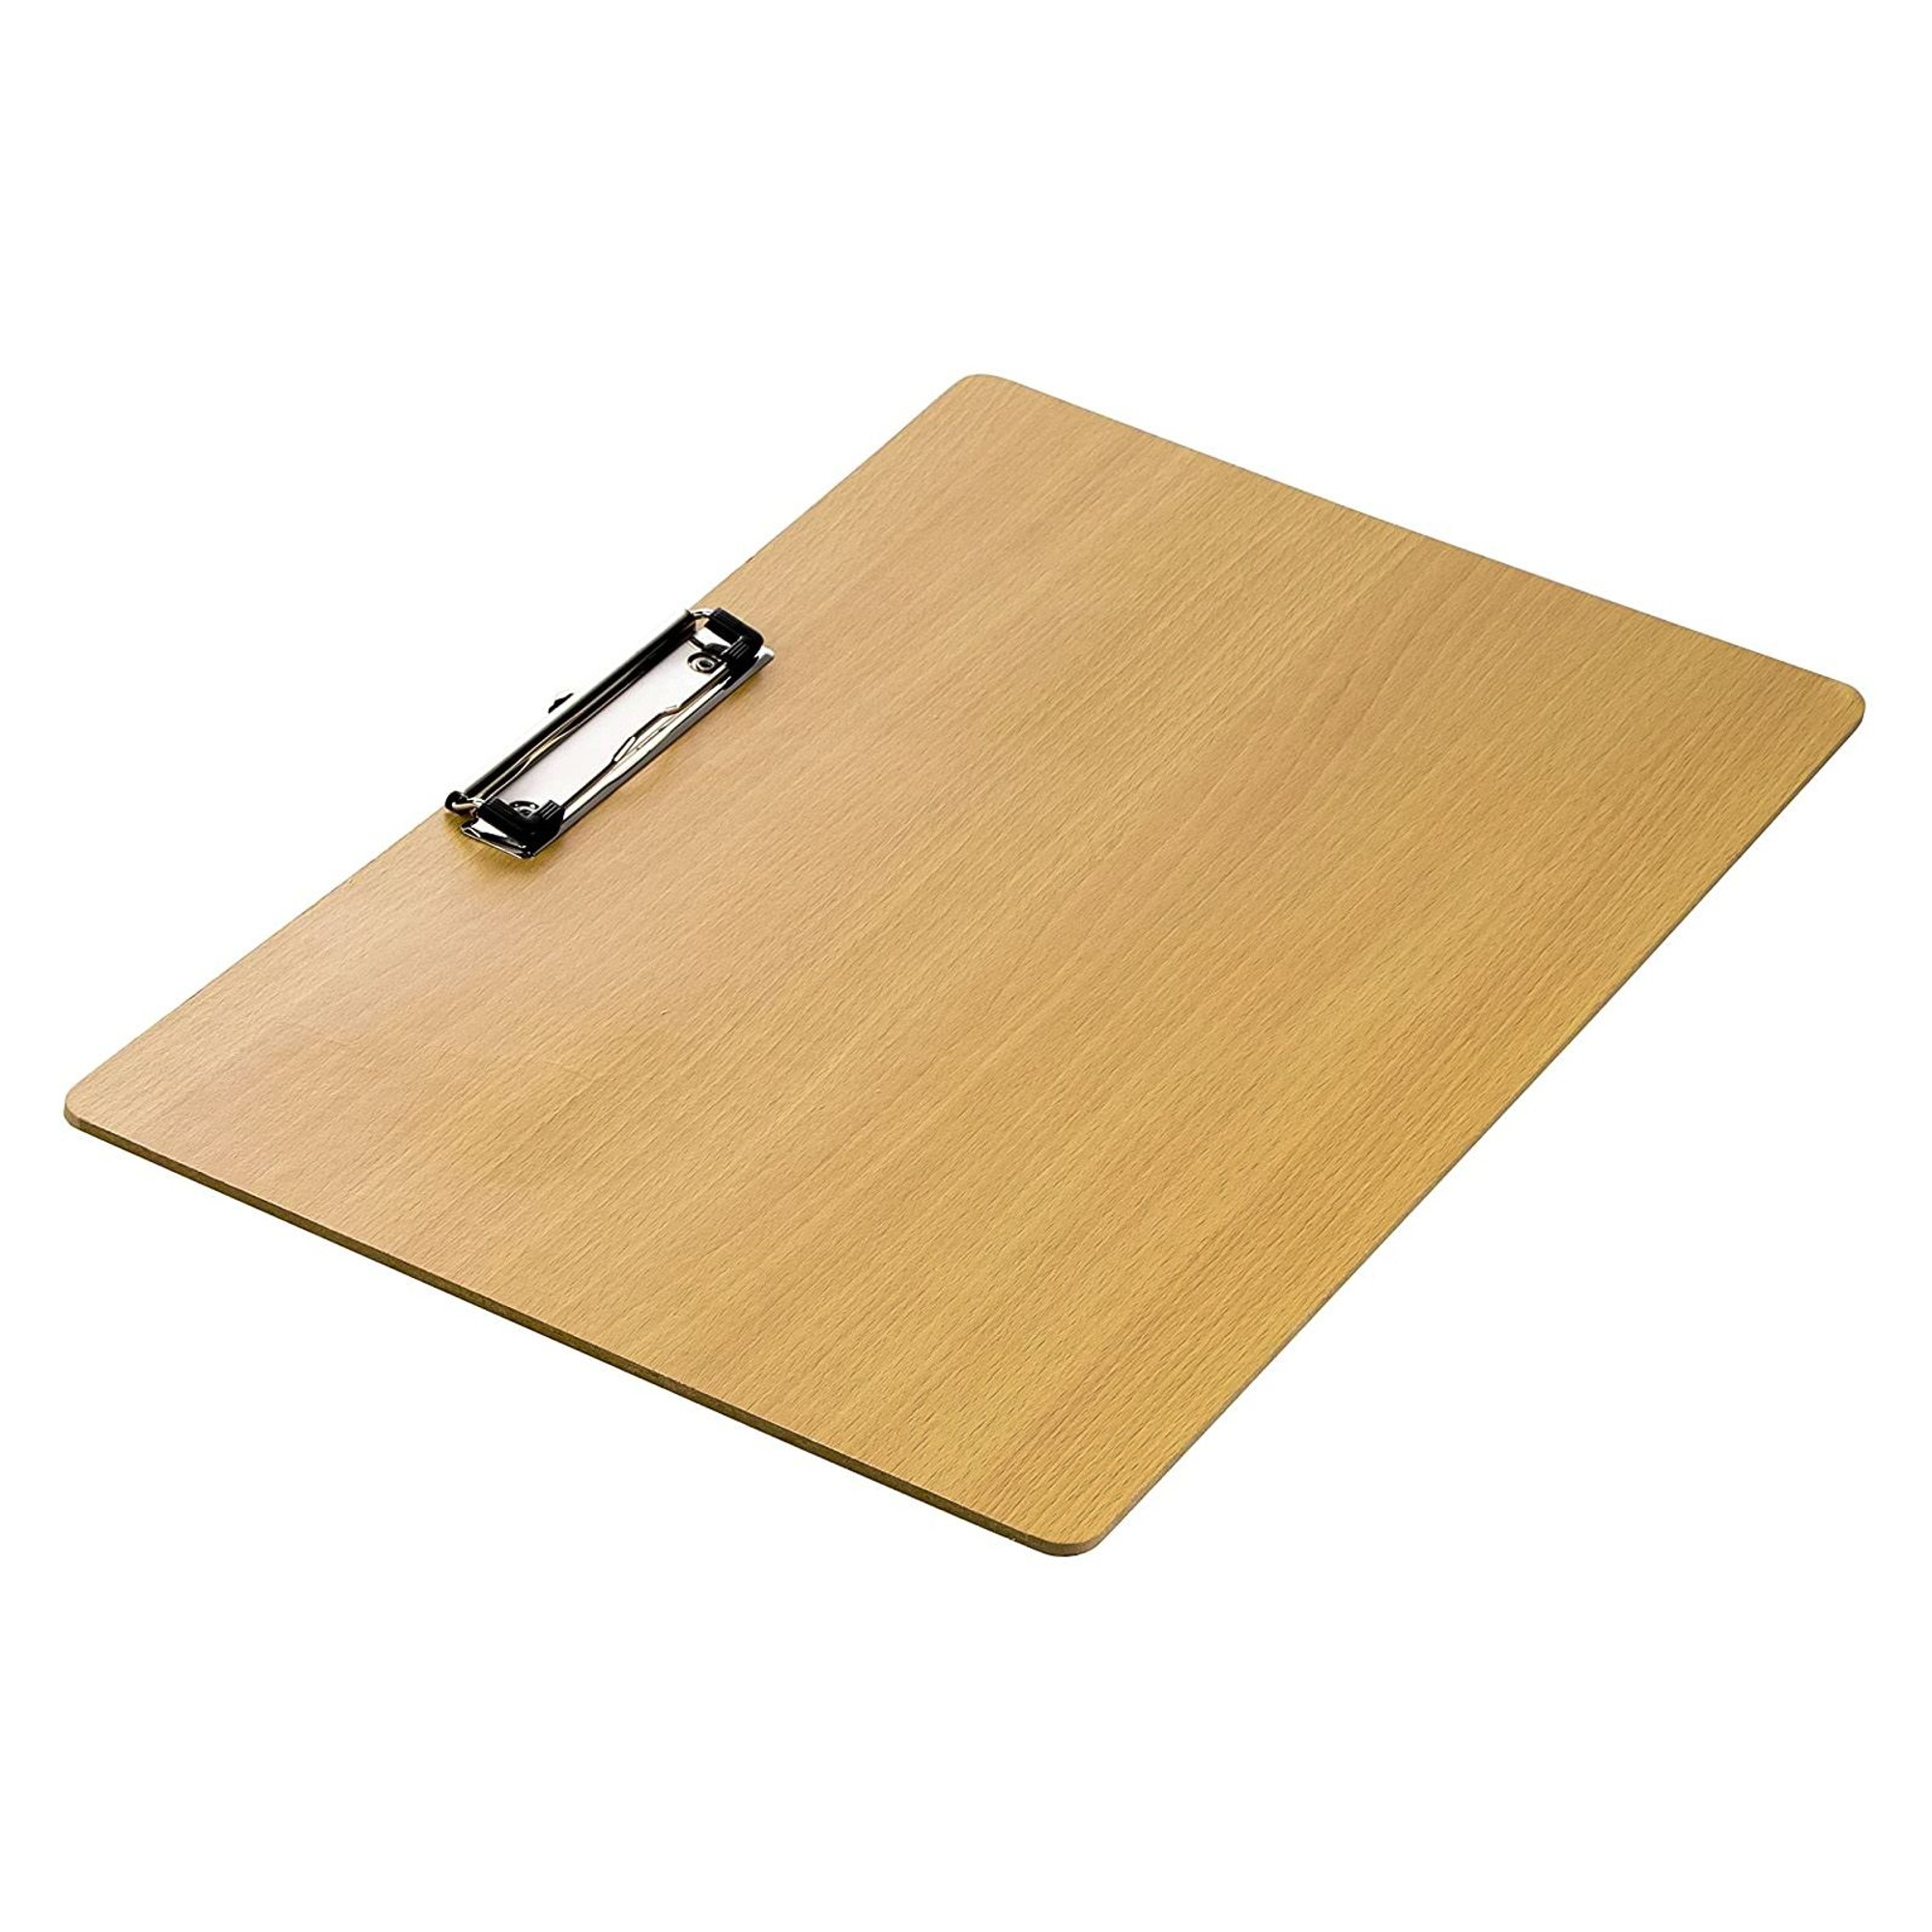 Large Landscape Clipboard Wooden Lap Board for Drawing and Sketching with Low Profile Clip (17 x 11 in)